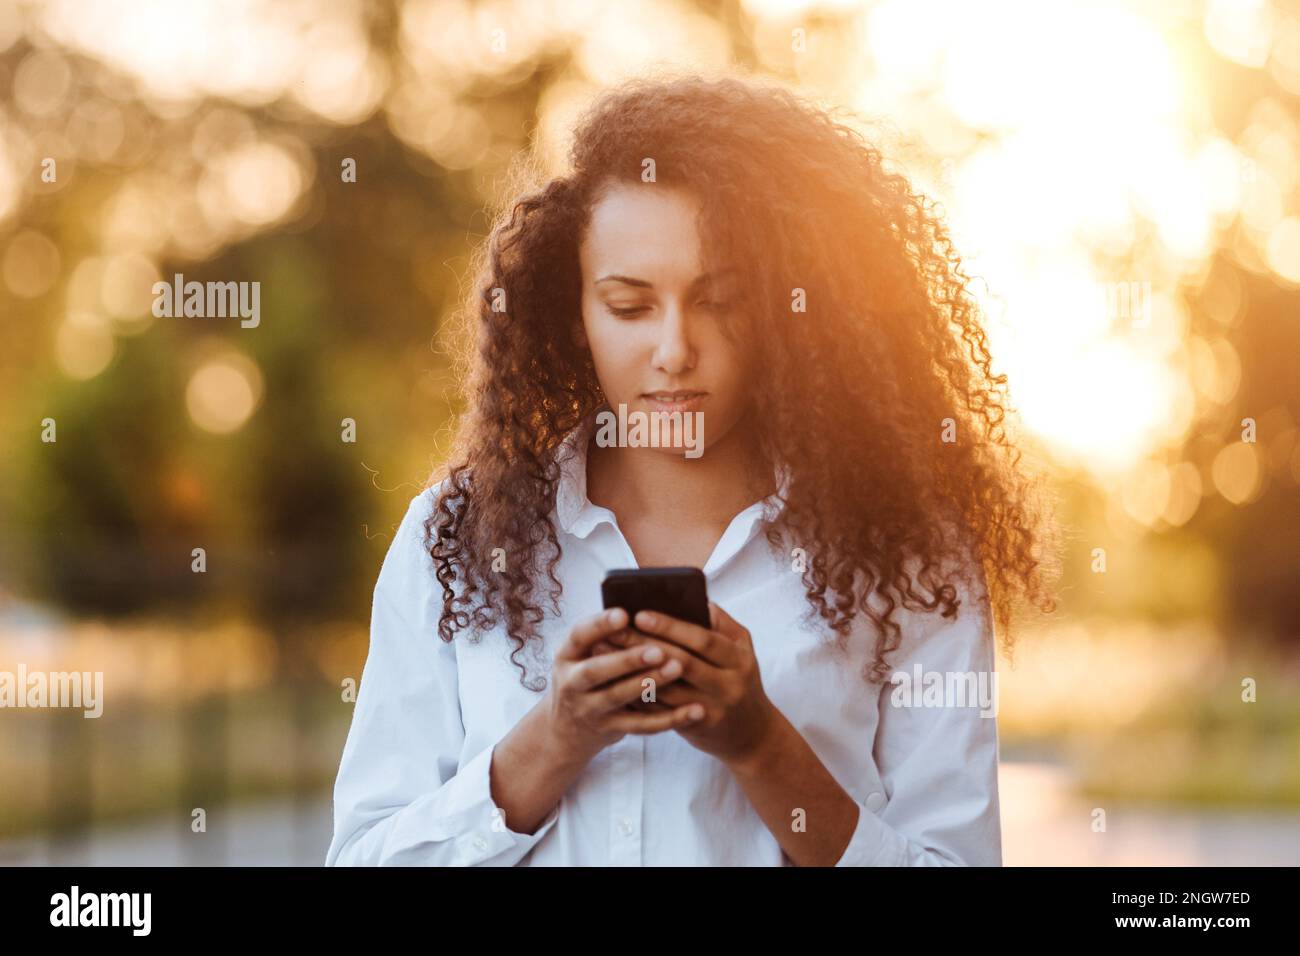 A young girl walks in the park and uses social networks using a mobile phone. Stock Photo